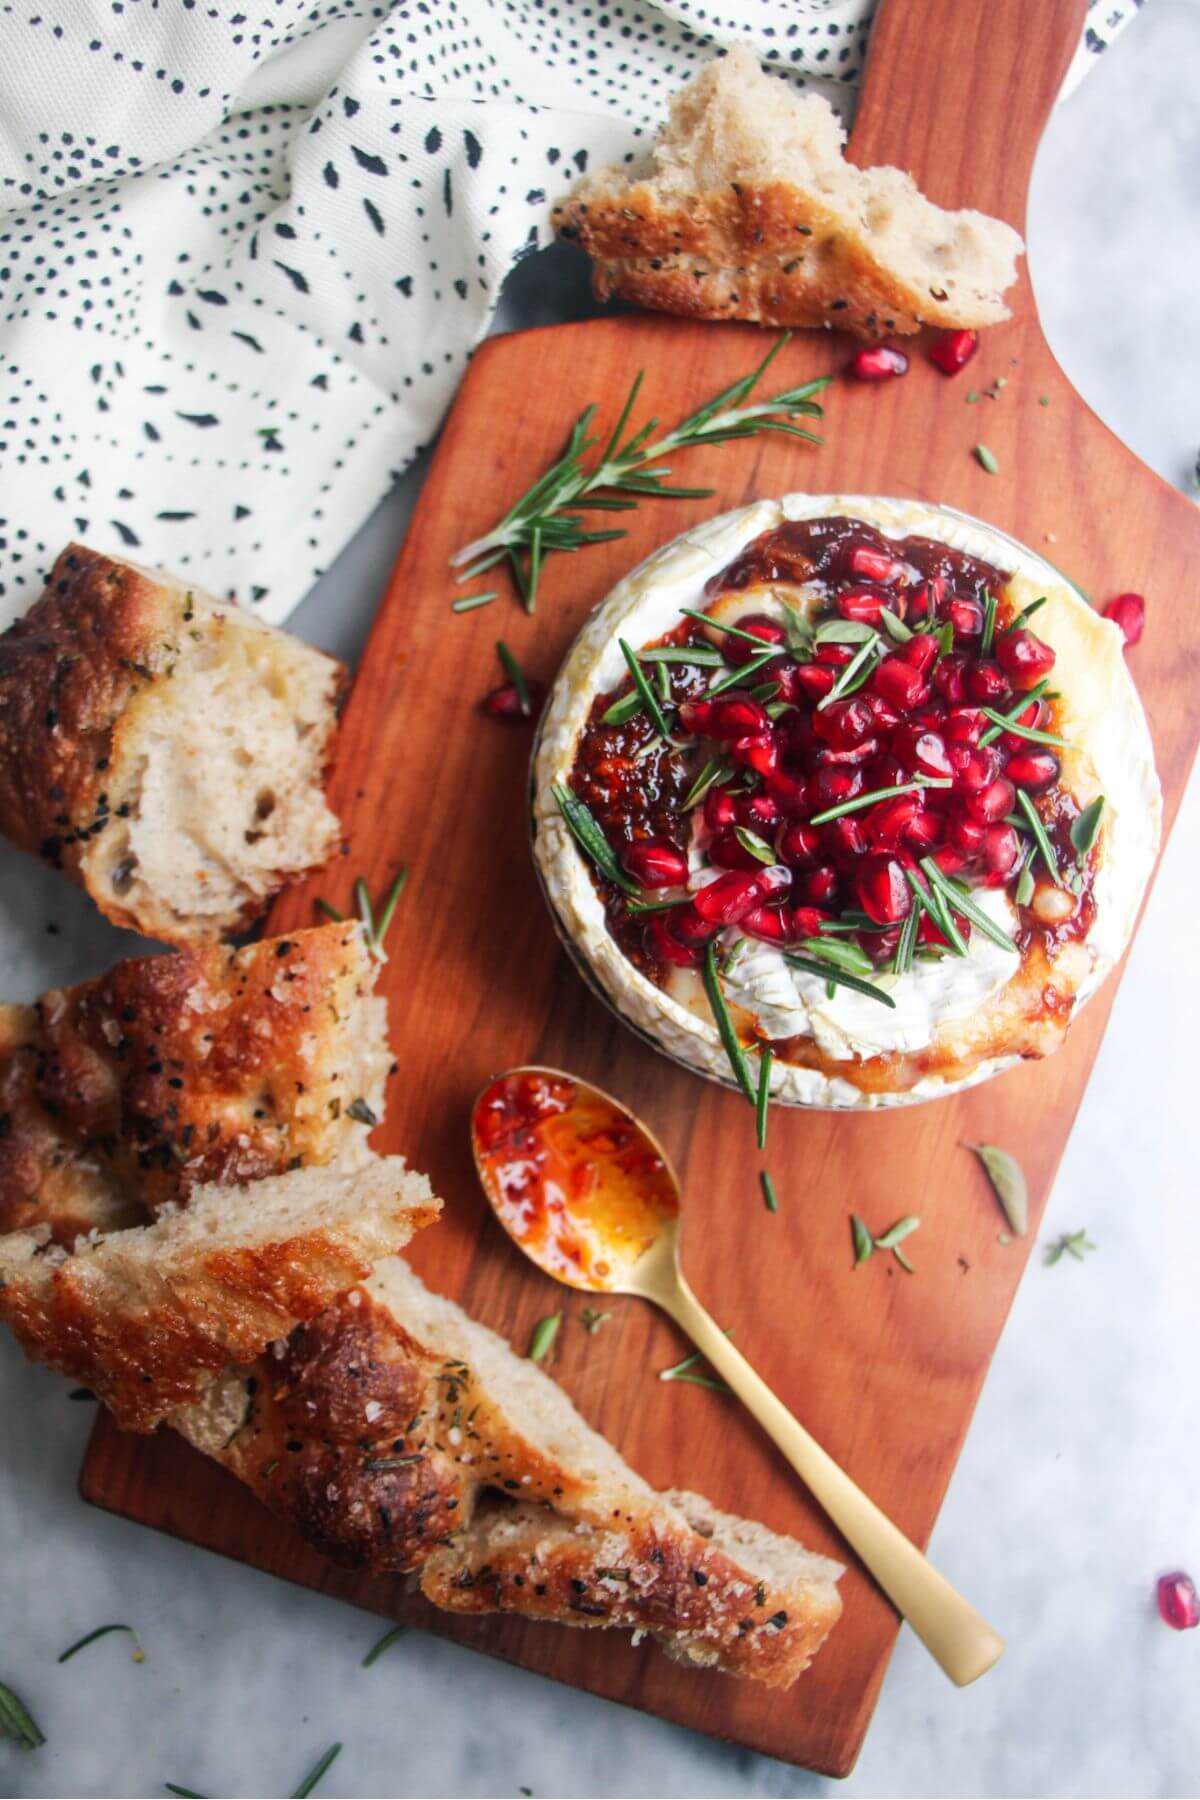 Wheel of baked camembert with pomegranate seeds, rosemary and thyme on top, with focaccia on the side.